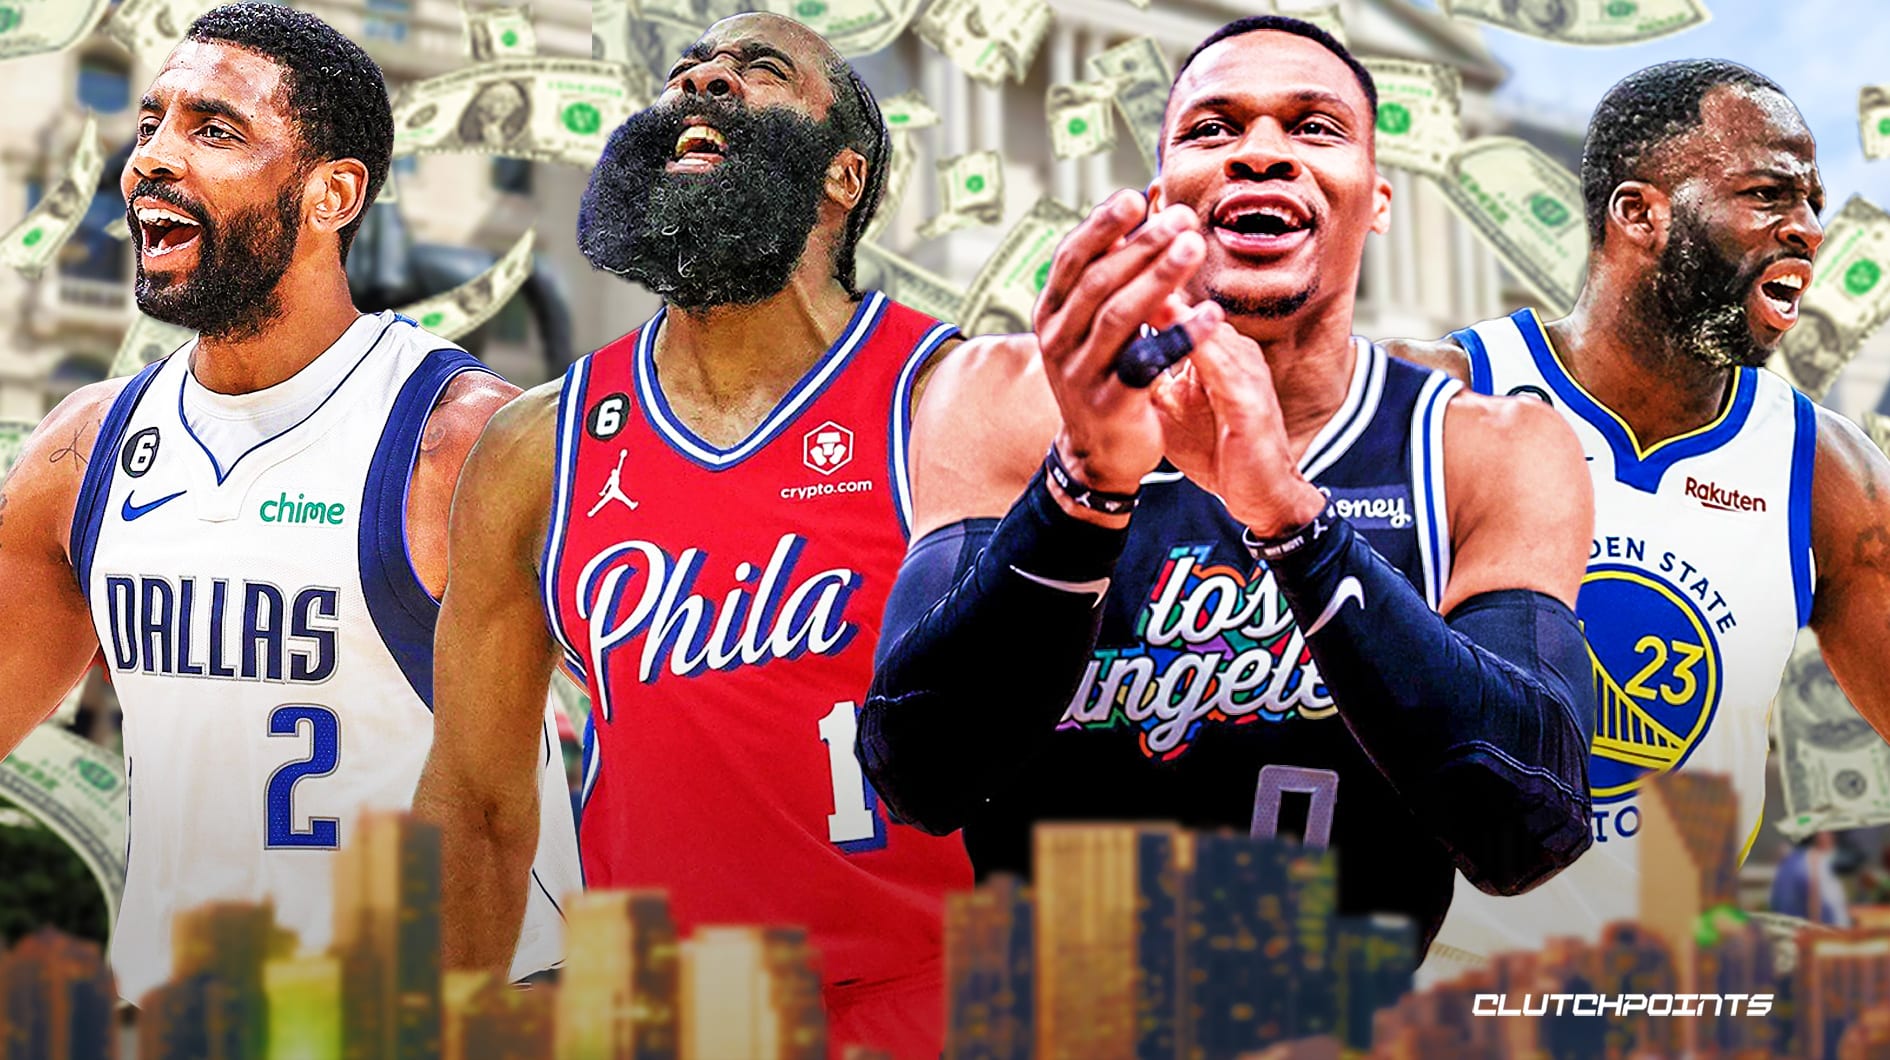 2023 NBA Free Agents 2023 NBA Free Agency Kyrie Irving James Harden Russell Westbrook Draymond Green 